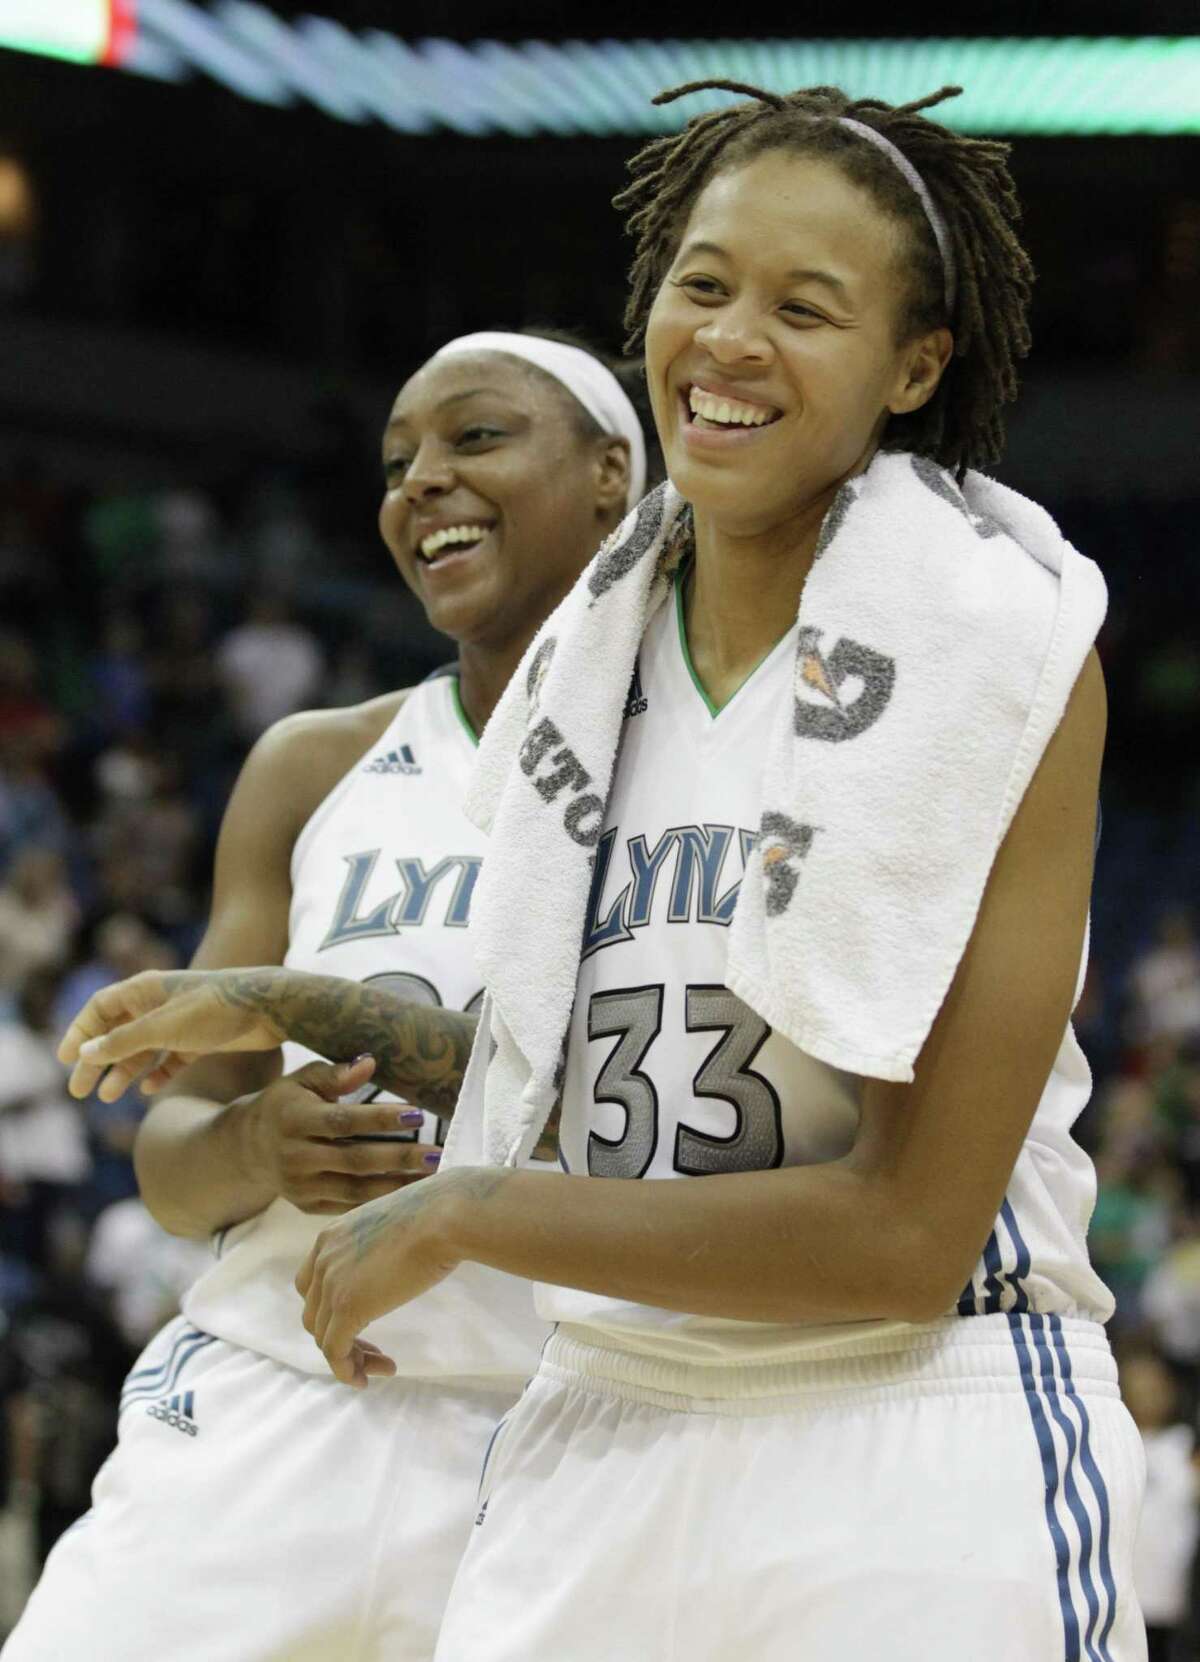 Minnesota Lynx forward Monica Wright (22) shares a laugh with teammate guard Seimone Augustus (33) in the second half of a WNBA basketball game against the Chicago Sky, Thursday, Sept. 8, 2011, in Minneapolis. Augustus lead with 22 points in the Lynx's 78-69 victory. (AP Photo/Stacy Bengs)